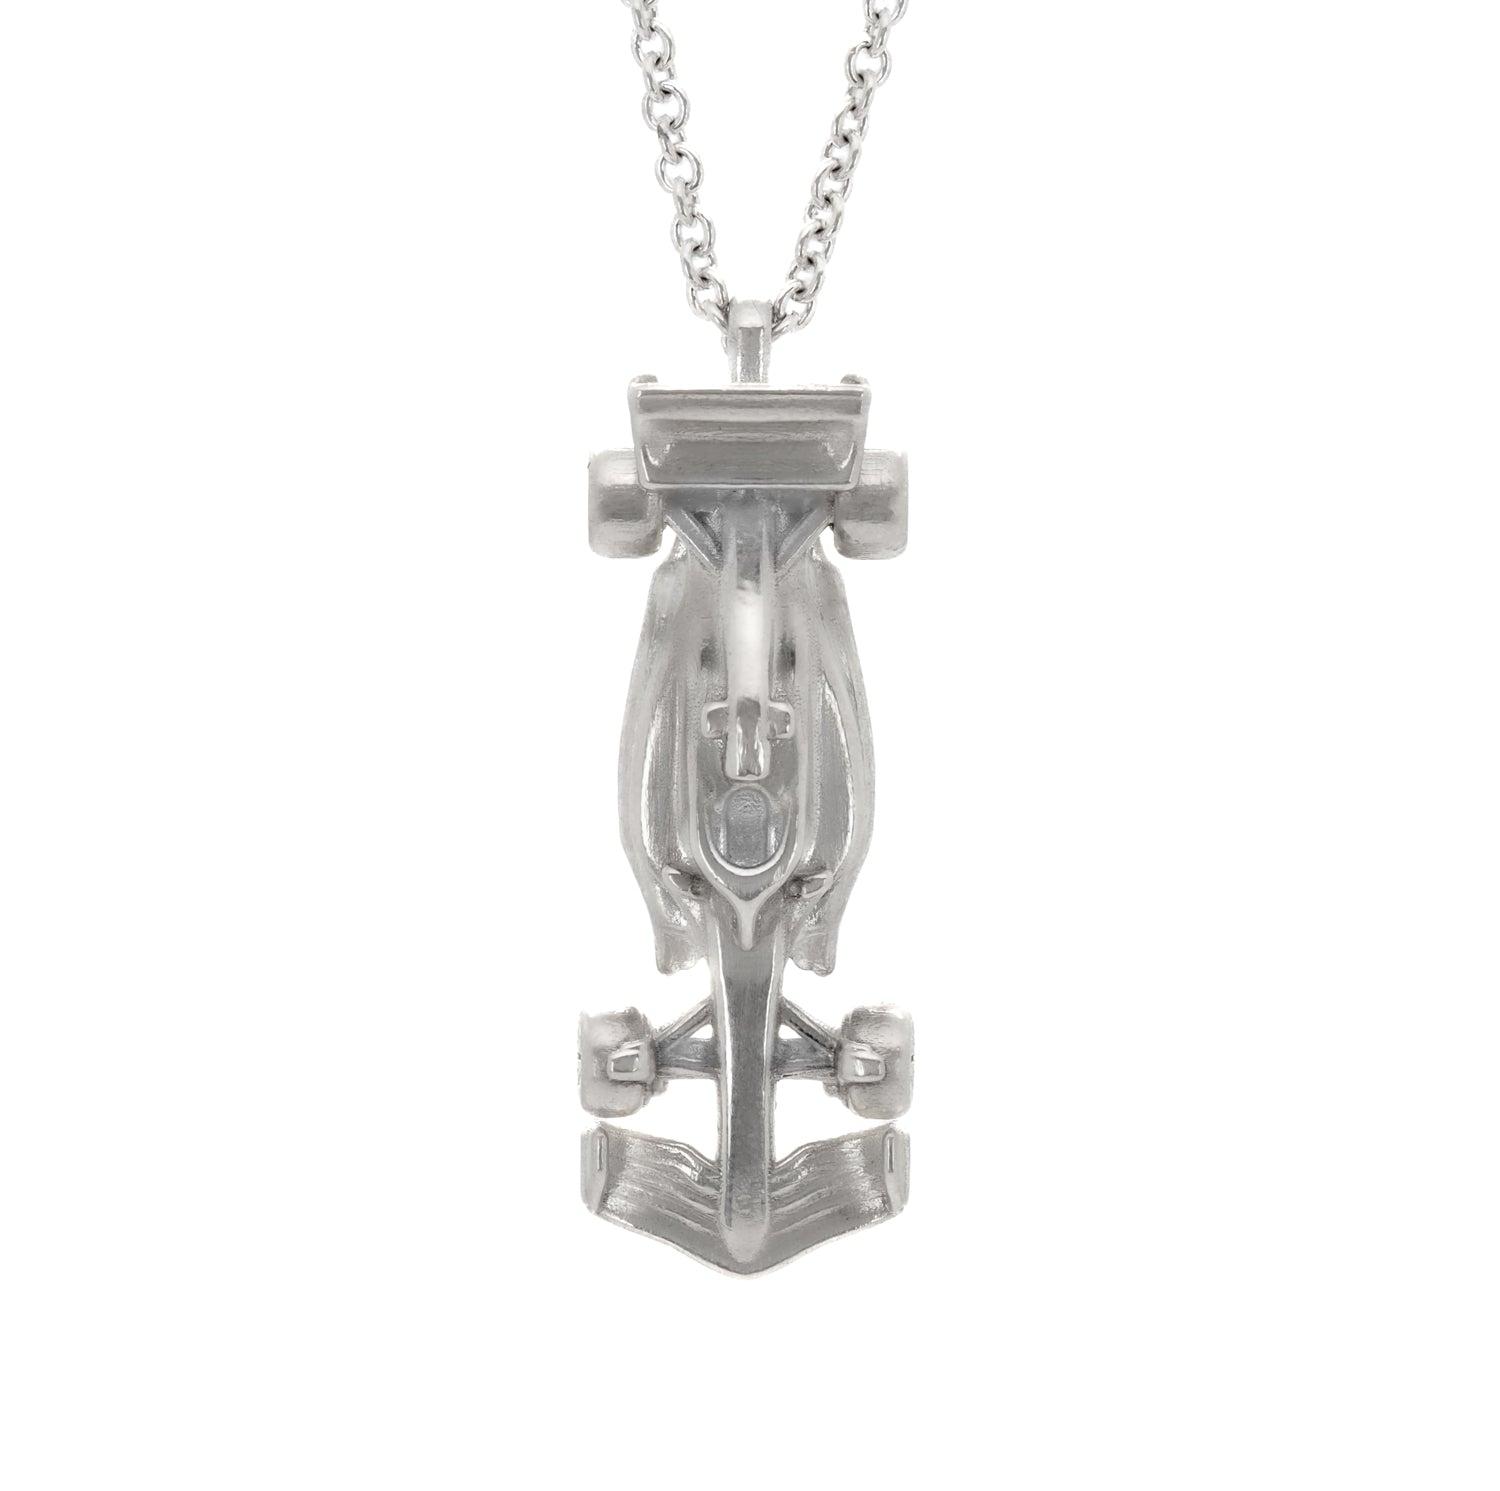 The Race Car Necklace is a stunning piece that captures the essence of speed and adrenaline. Crafted from sterling silver, this necklace features a sleek and aerodynamic race car design complete with intricate details. The streamlined body of the car creates a sense of movement and energy. The wheels of the car are finely detailed and perfectly balanced, ready to take on any race course.